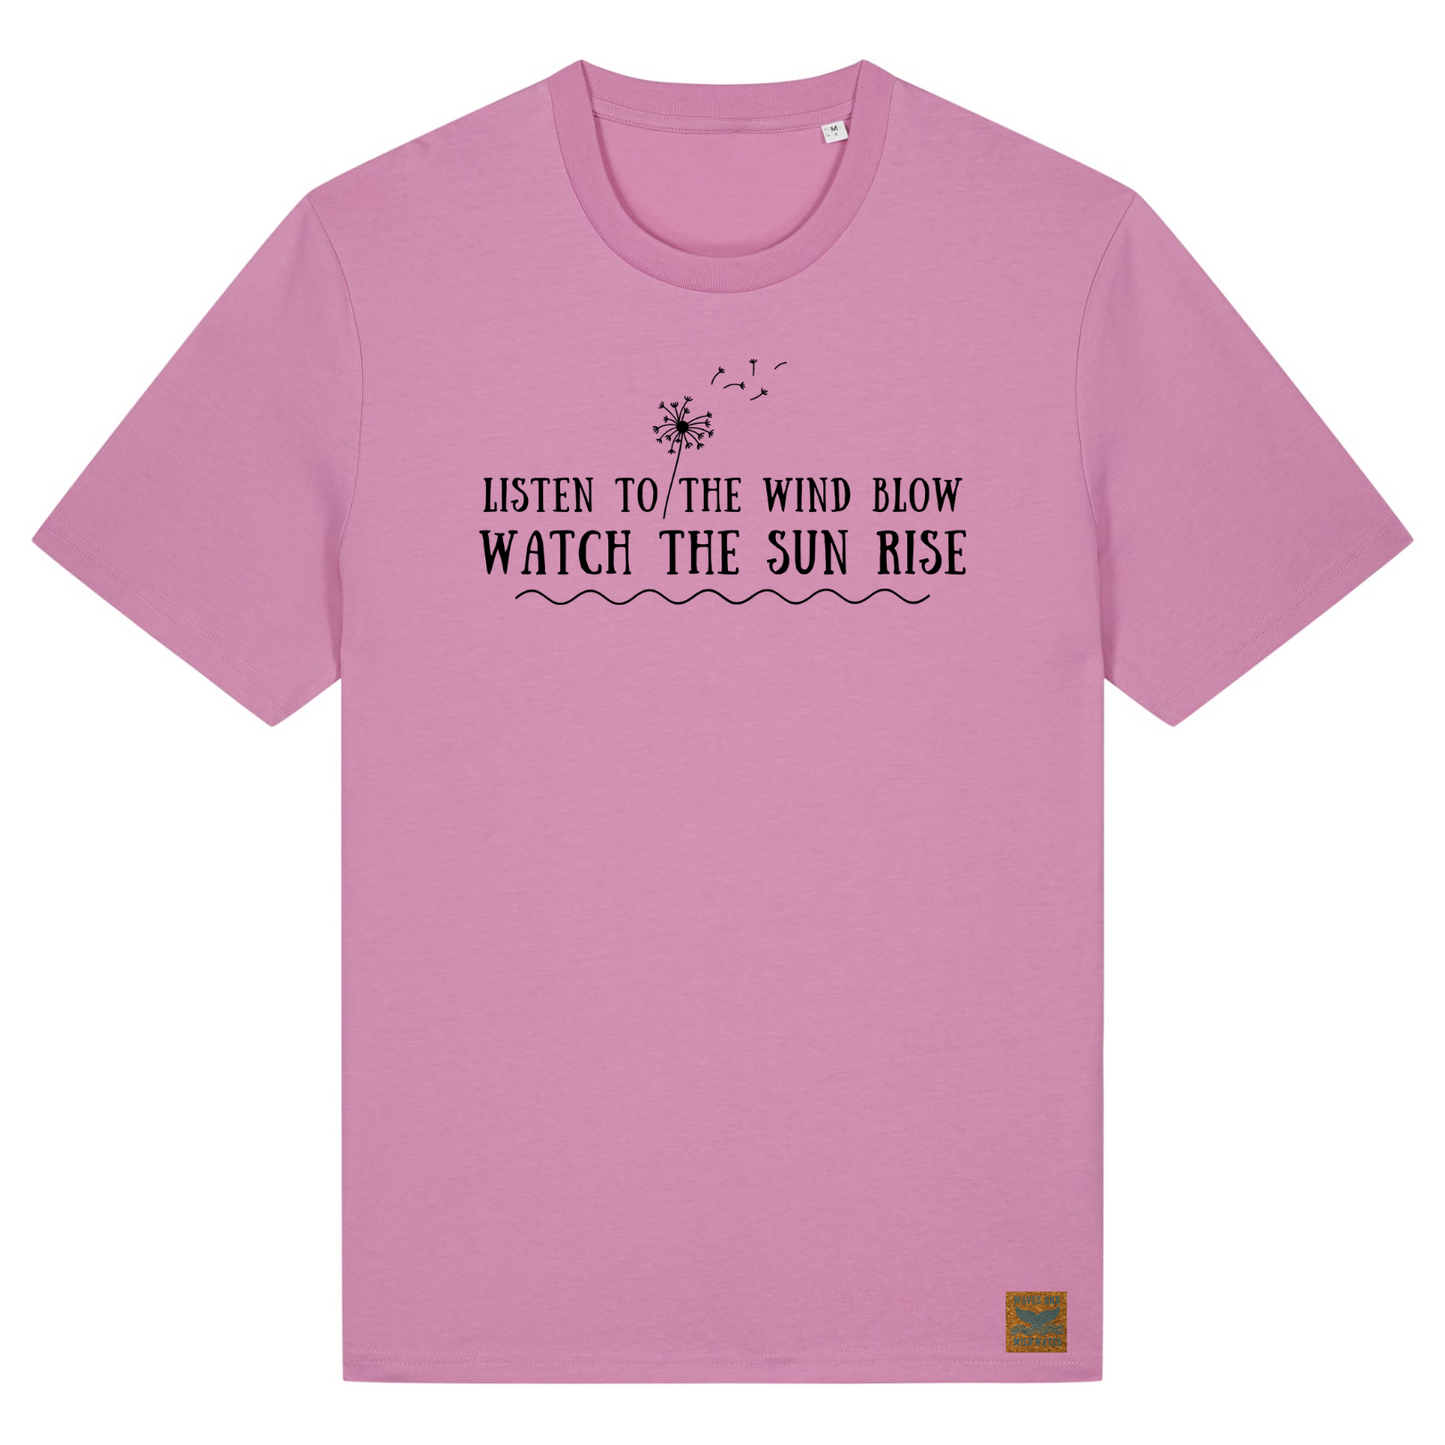 This stunning pink organic cotton t-shirt from Waves and Wild Water has the text Listen To The Wind Blow Watch The Sun Rise hand printed on the front in black chemical free ink. There is also a simple dandelion clock image. The design is a nod to the song The Chain by Fleetwood Mac.